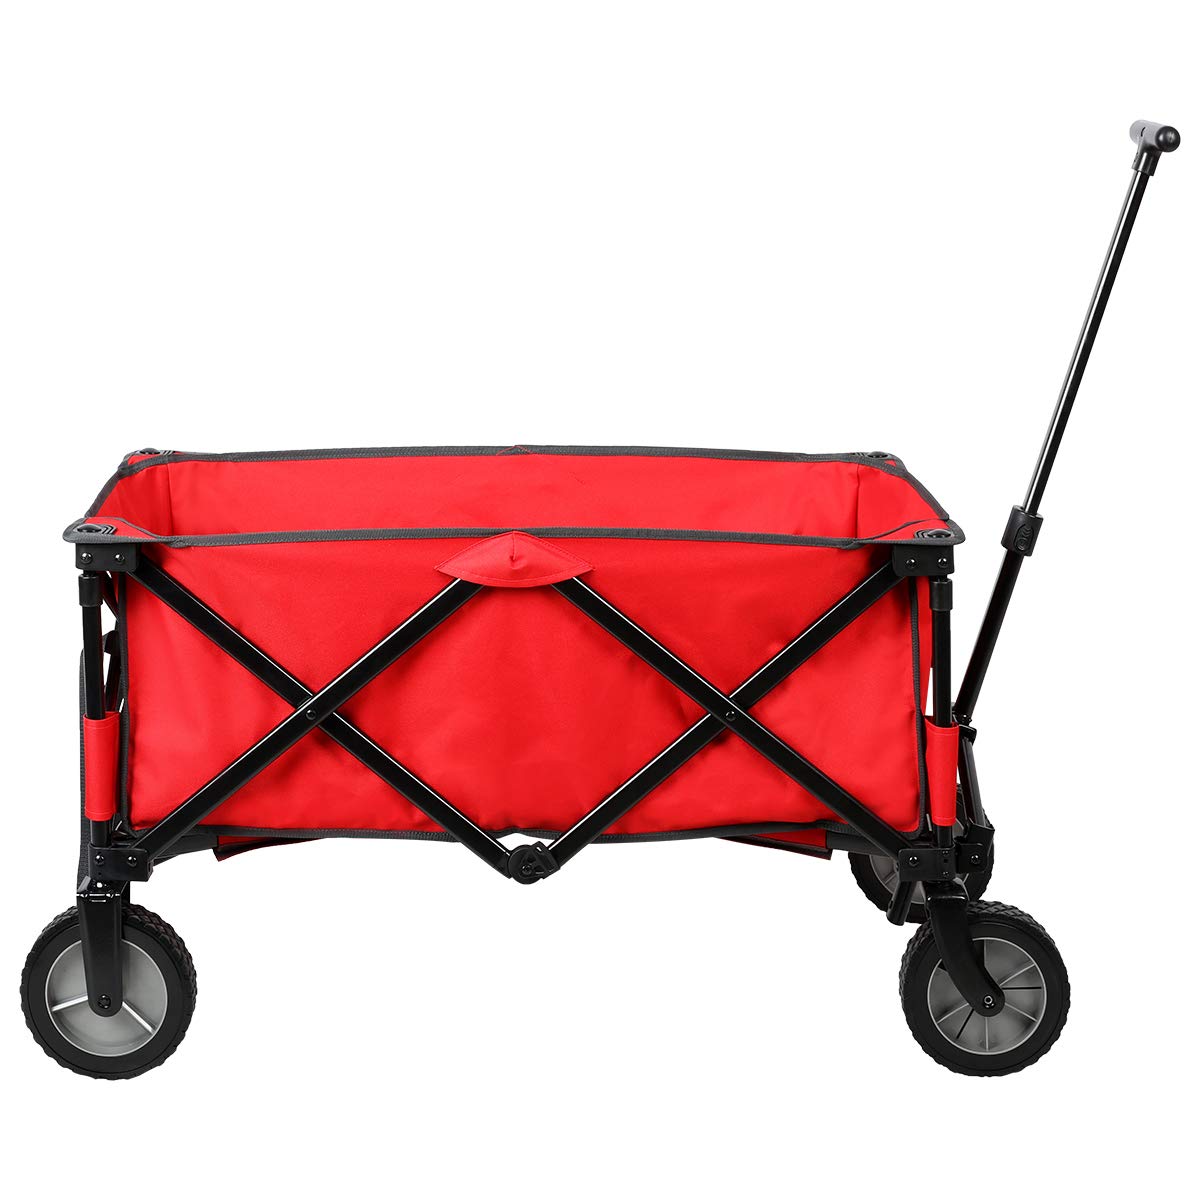 Portal Quad Folding Utility Wagon Camping Garden Cart with Telescoping Handle, Red